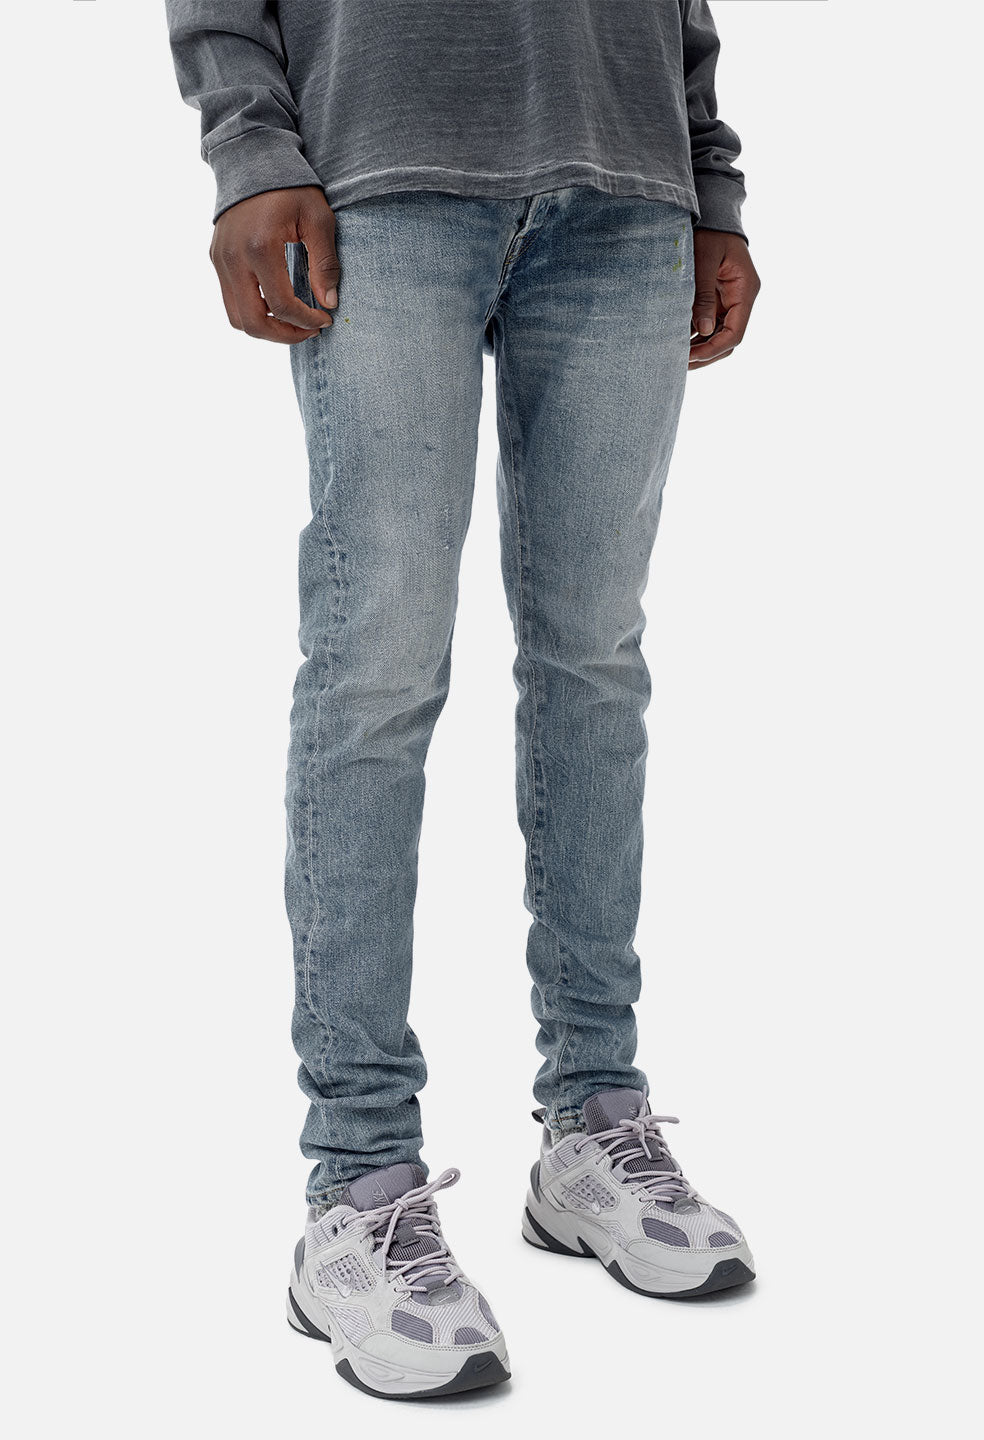 lucky brand jeans mens near me